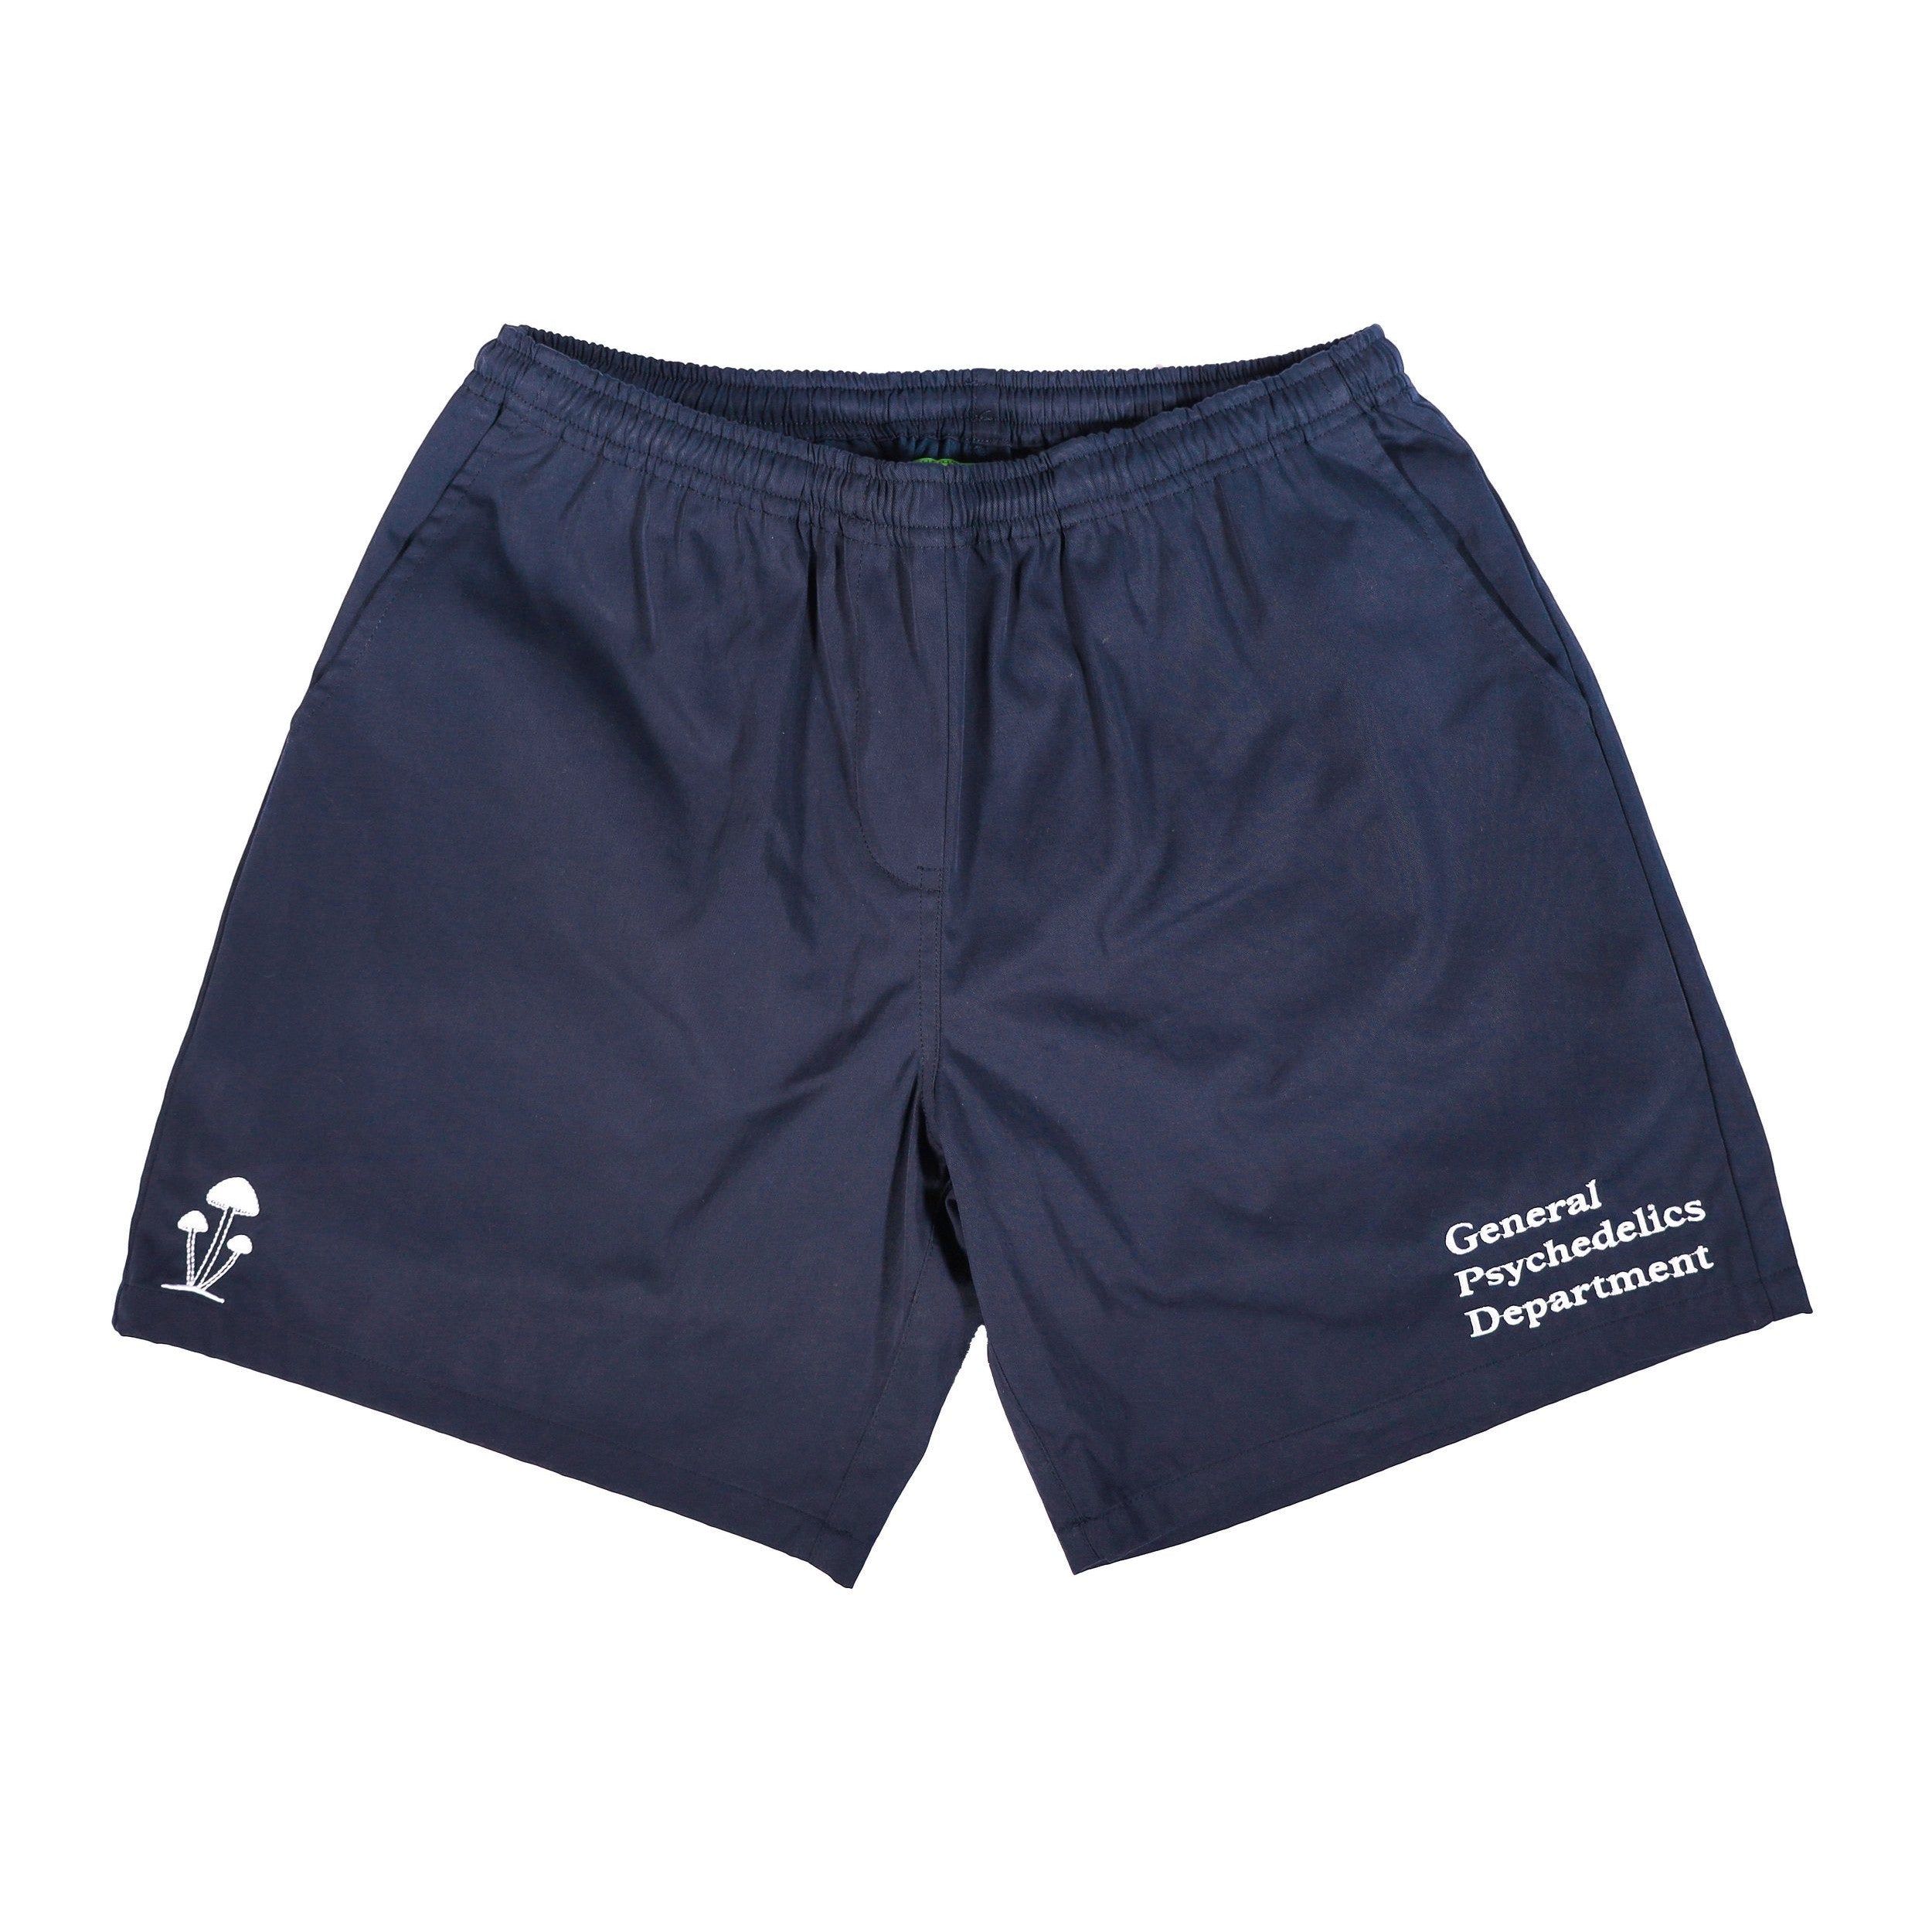 General Psychedelic Department Shorts - Navy-Mister Green-Mister Green